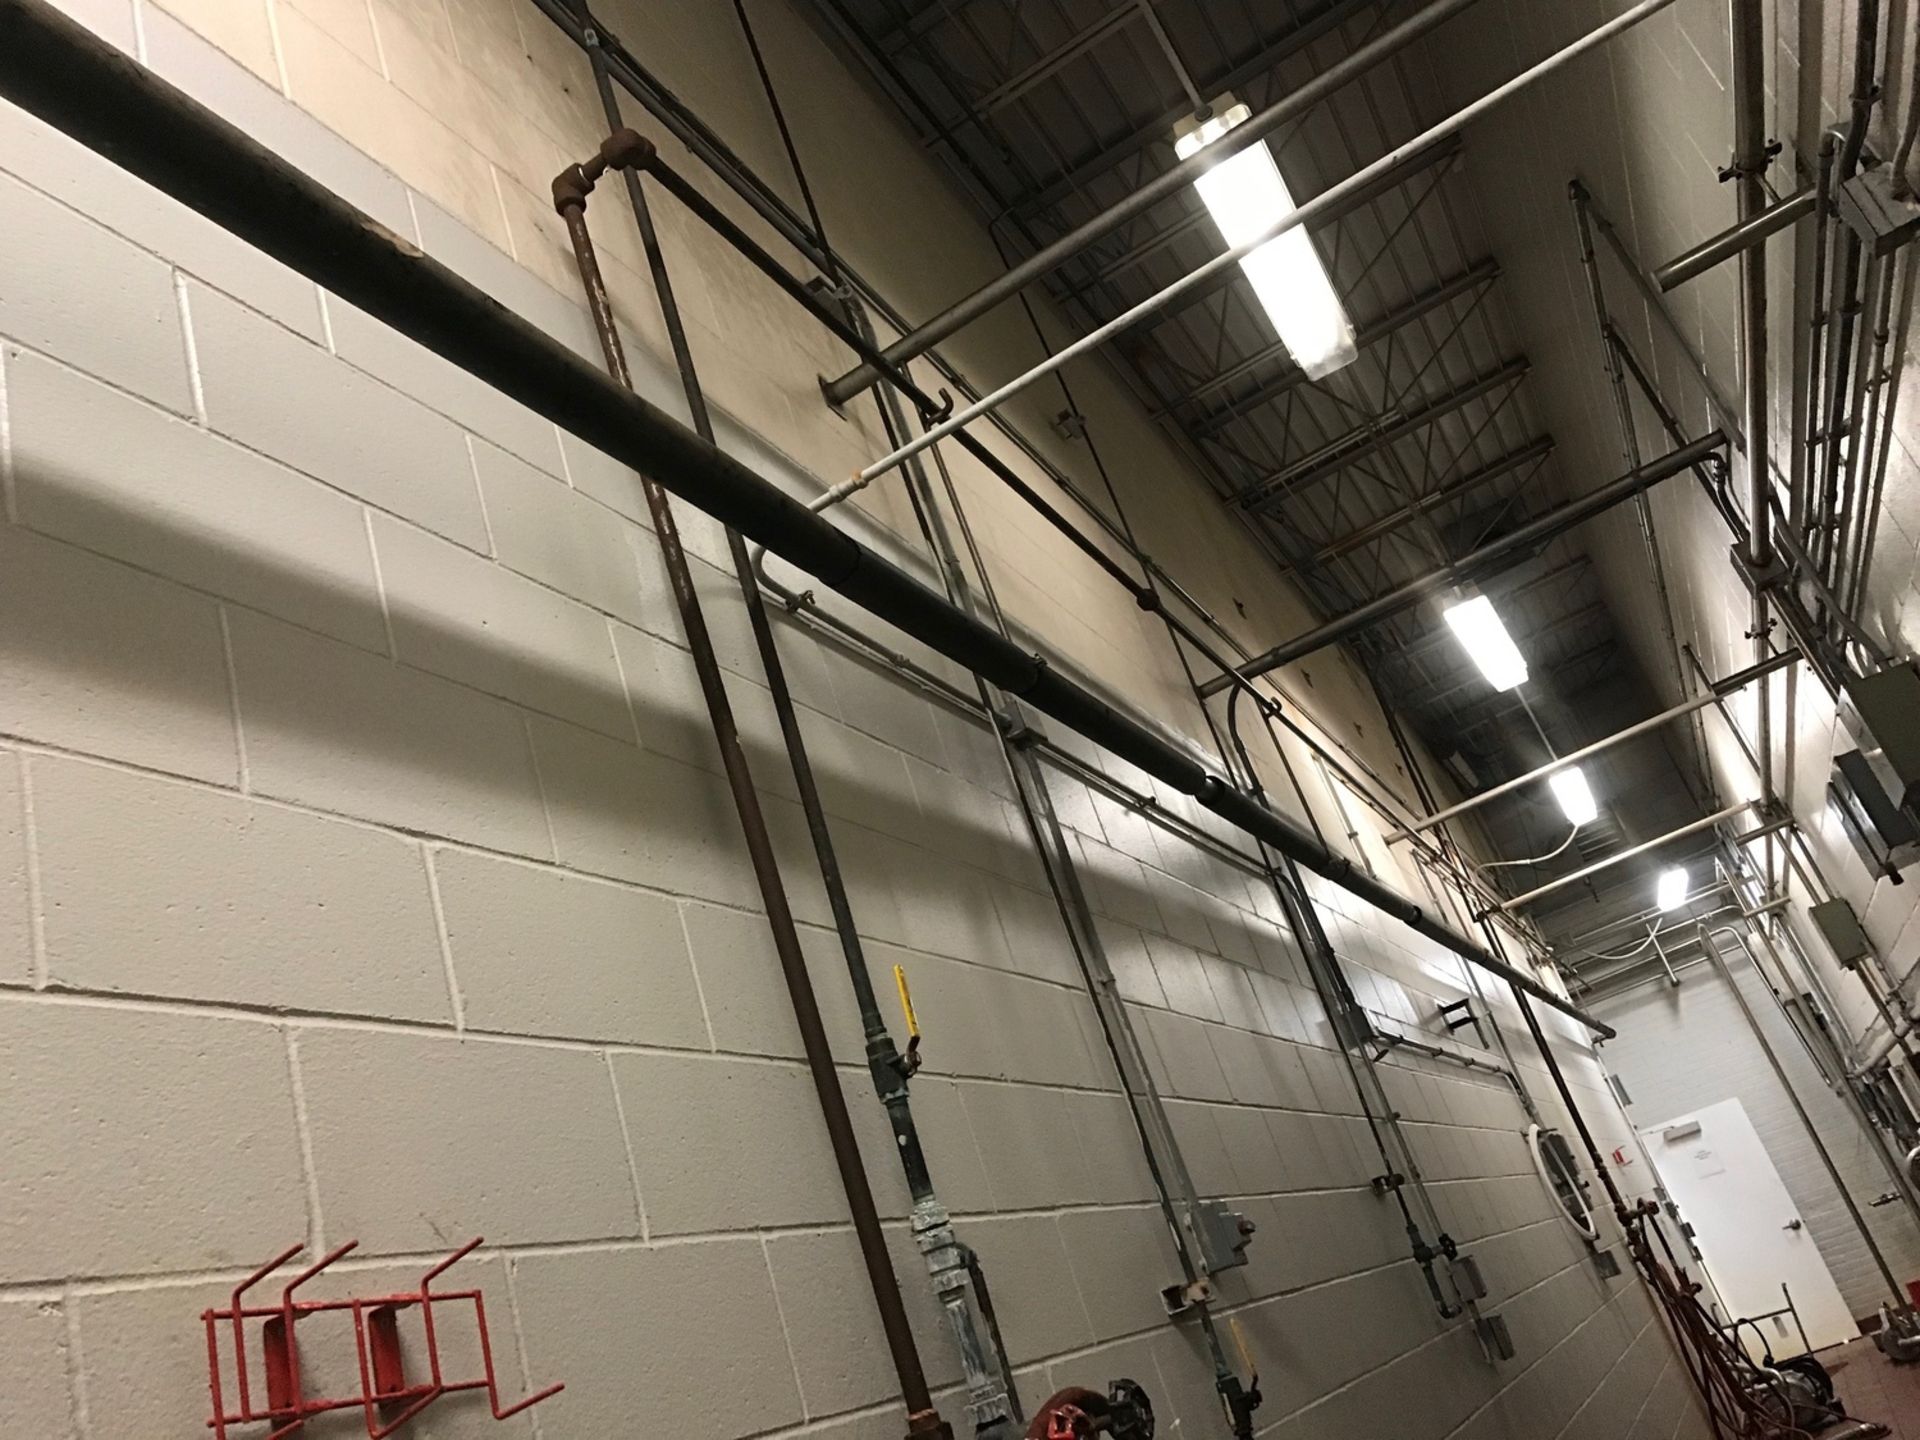 All Stainless Pipe in Alcove area, Approximately 250'x 2.5" - Image 2 of 2